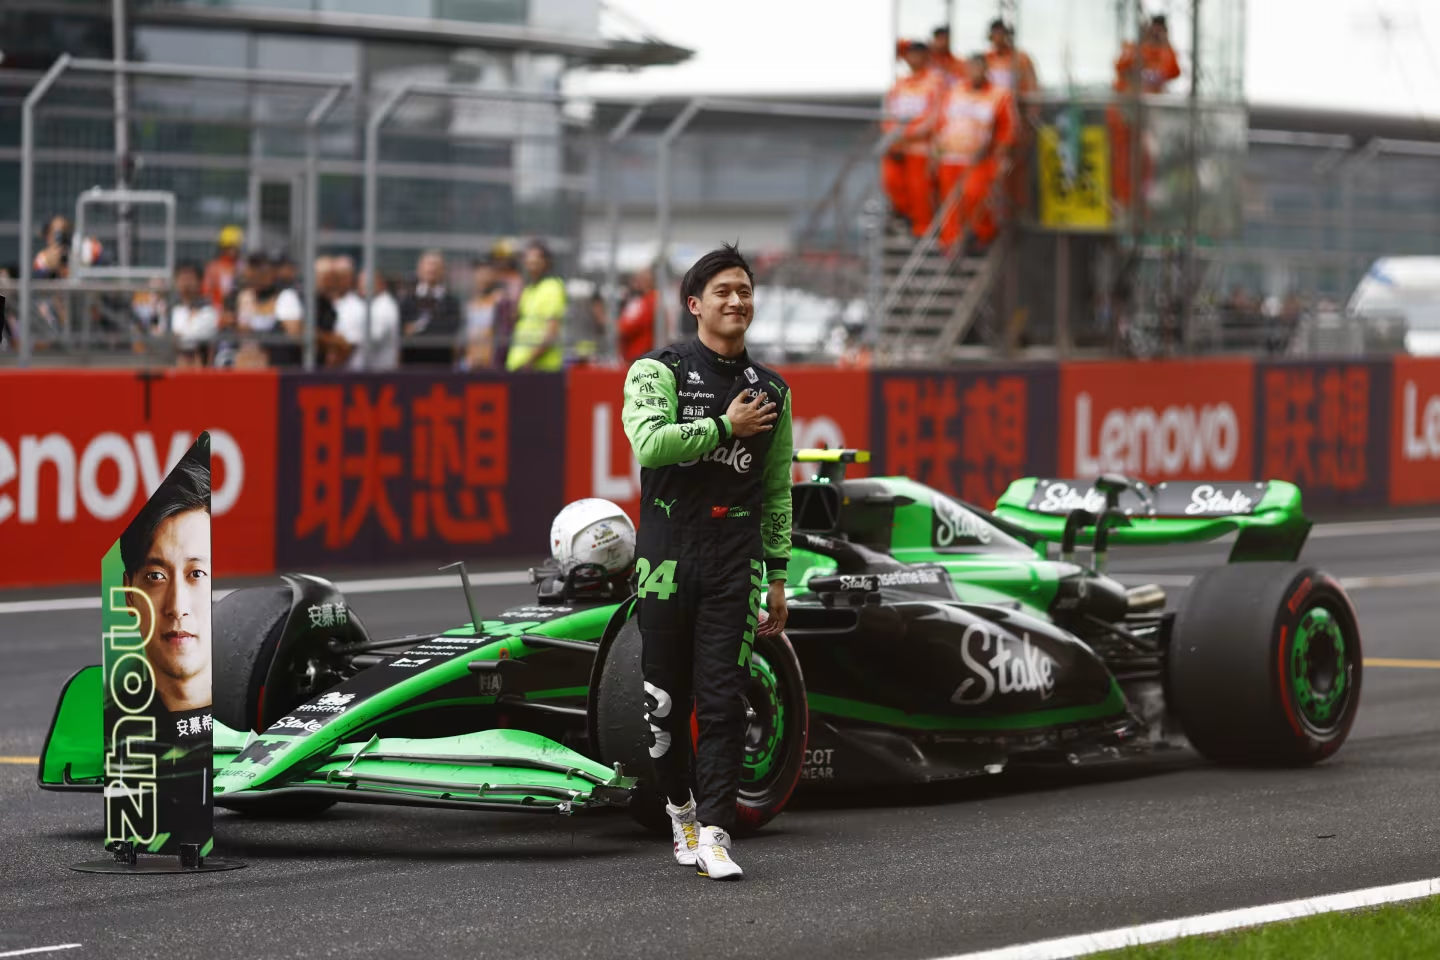 Zhou Guanyu’s first competition in his hometown was a significant milestone in Chinese motorsport history. Image: F1